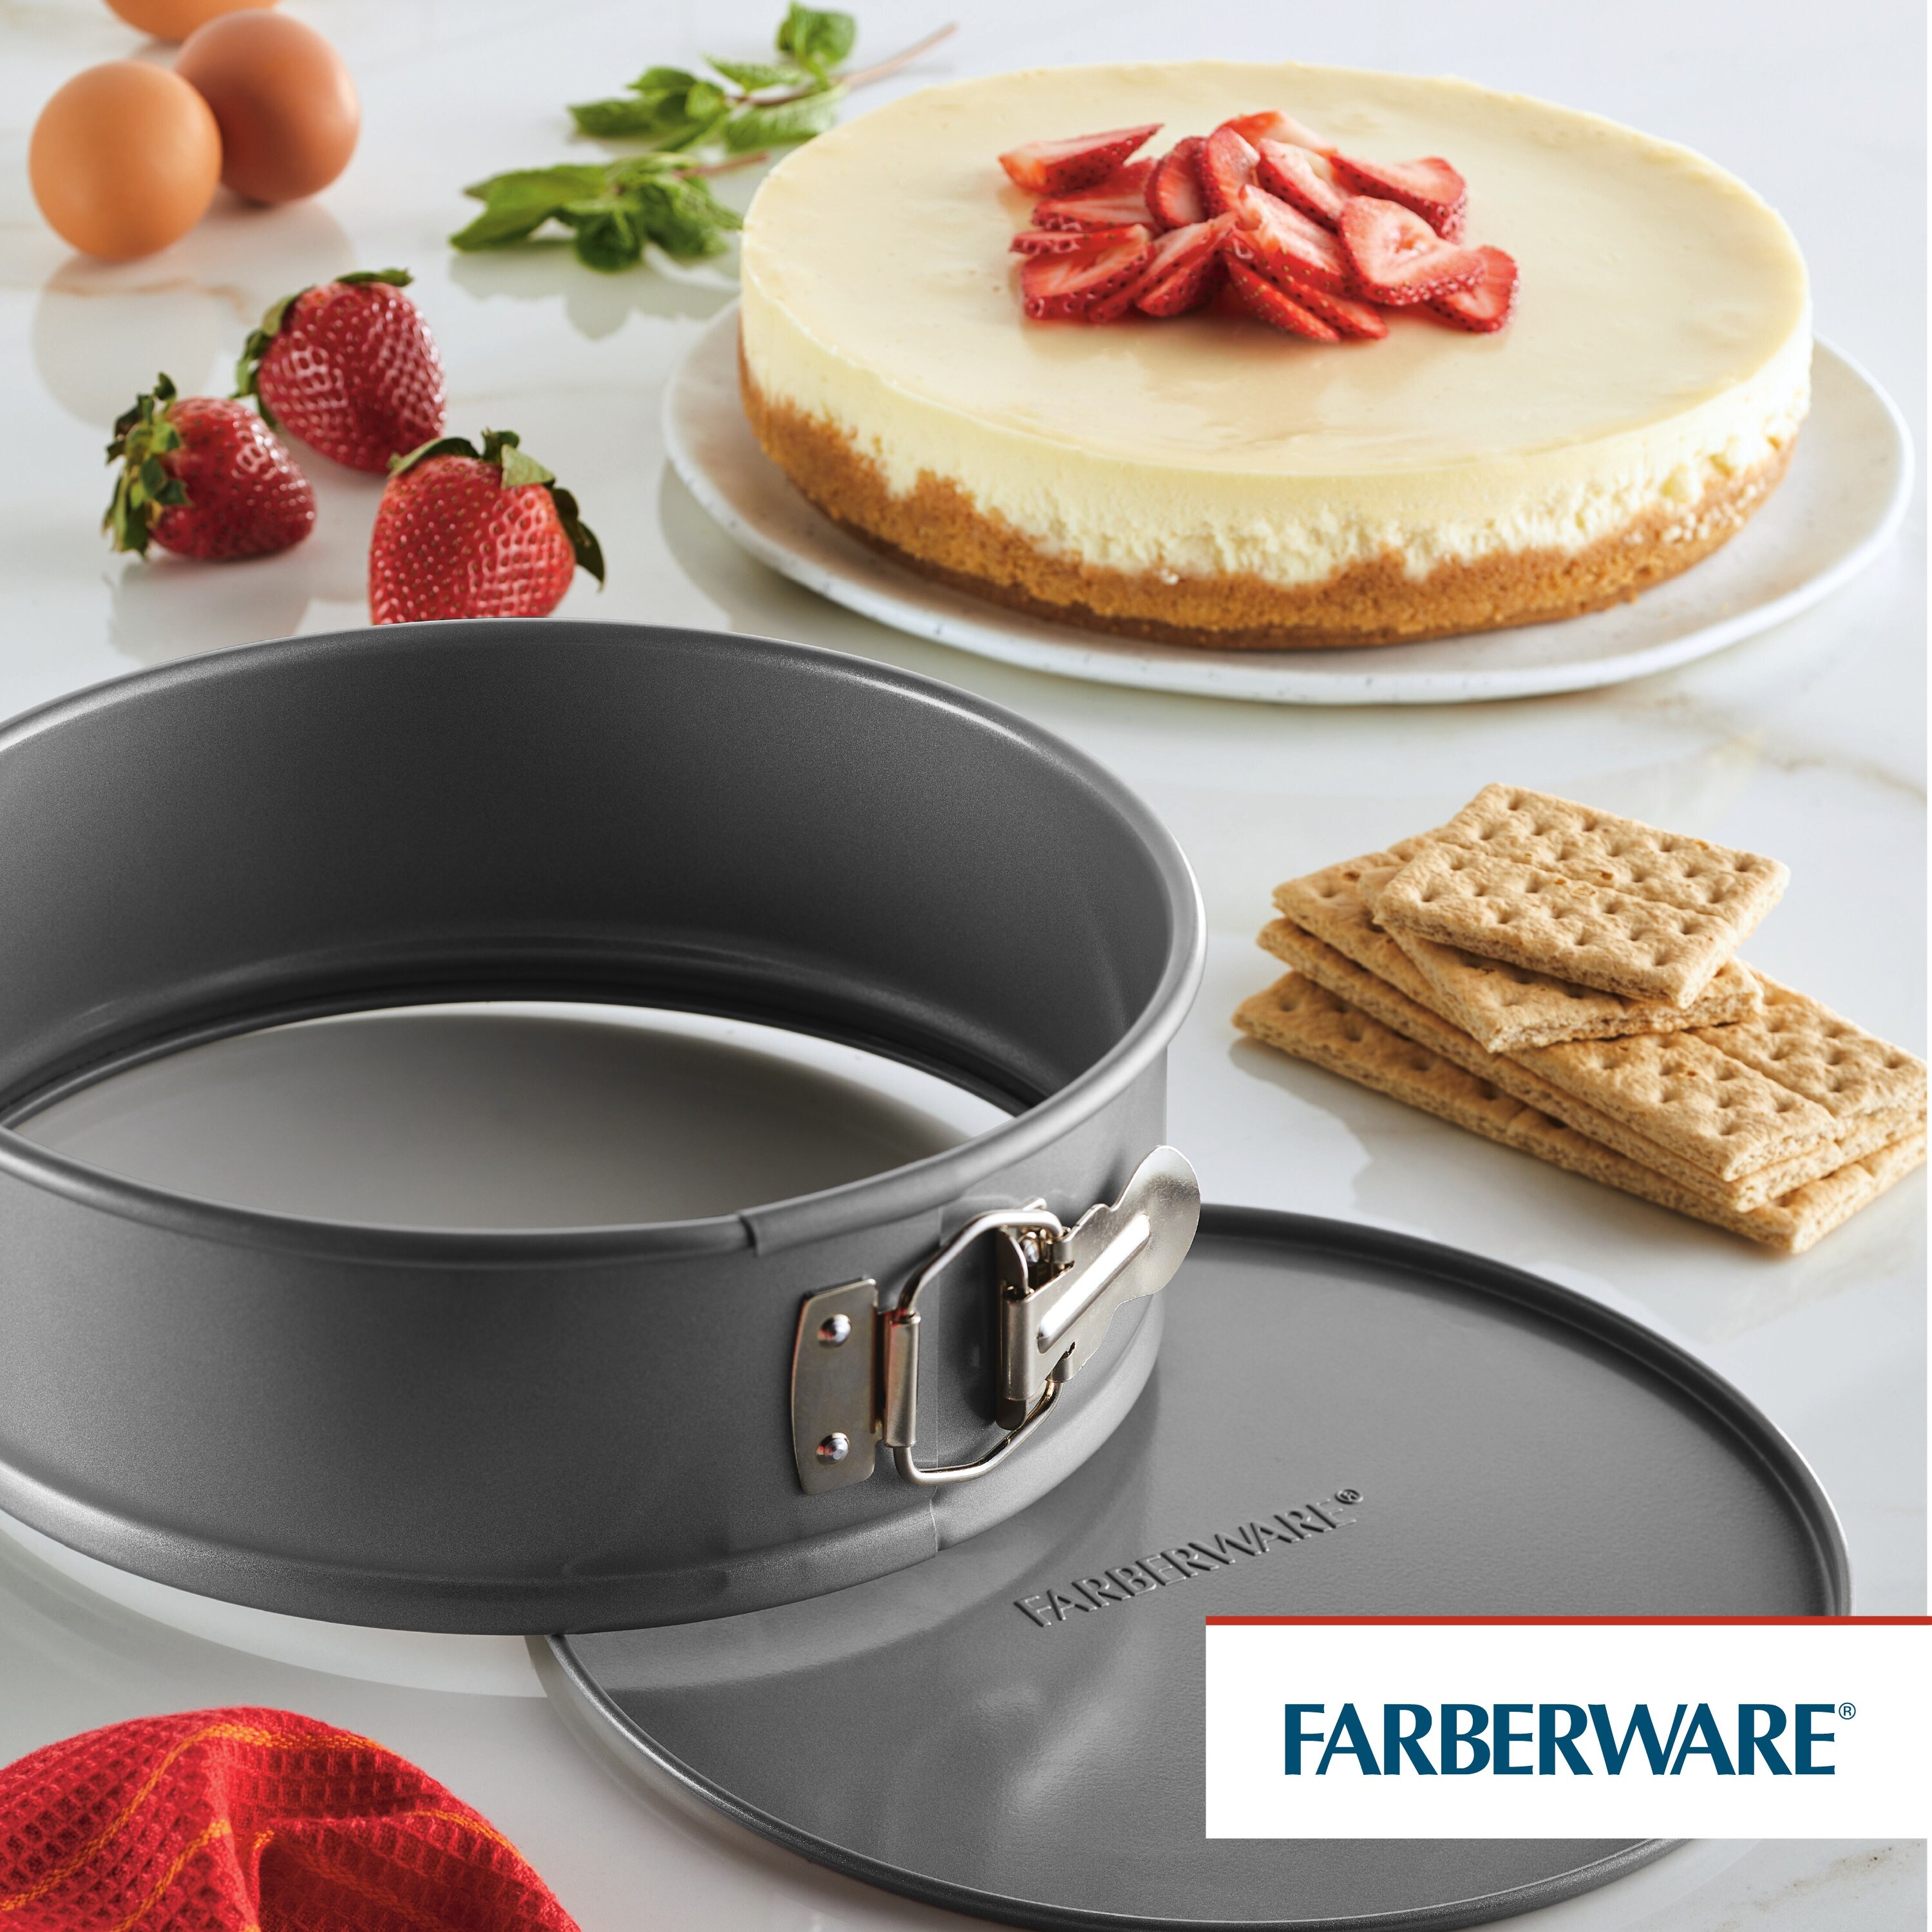 https://ak1.ostkcdn.com/images/products/is/images/direct/336a3a8536d4f0f5eded295ac9182f571adf6486/Farberware-Nonstick-Bakeware-9-inch-Grey-Round-Springform-Pan.jpg